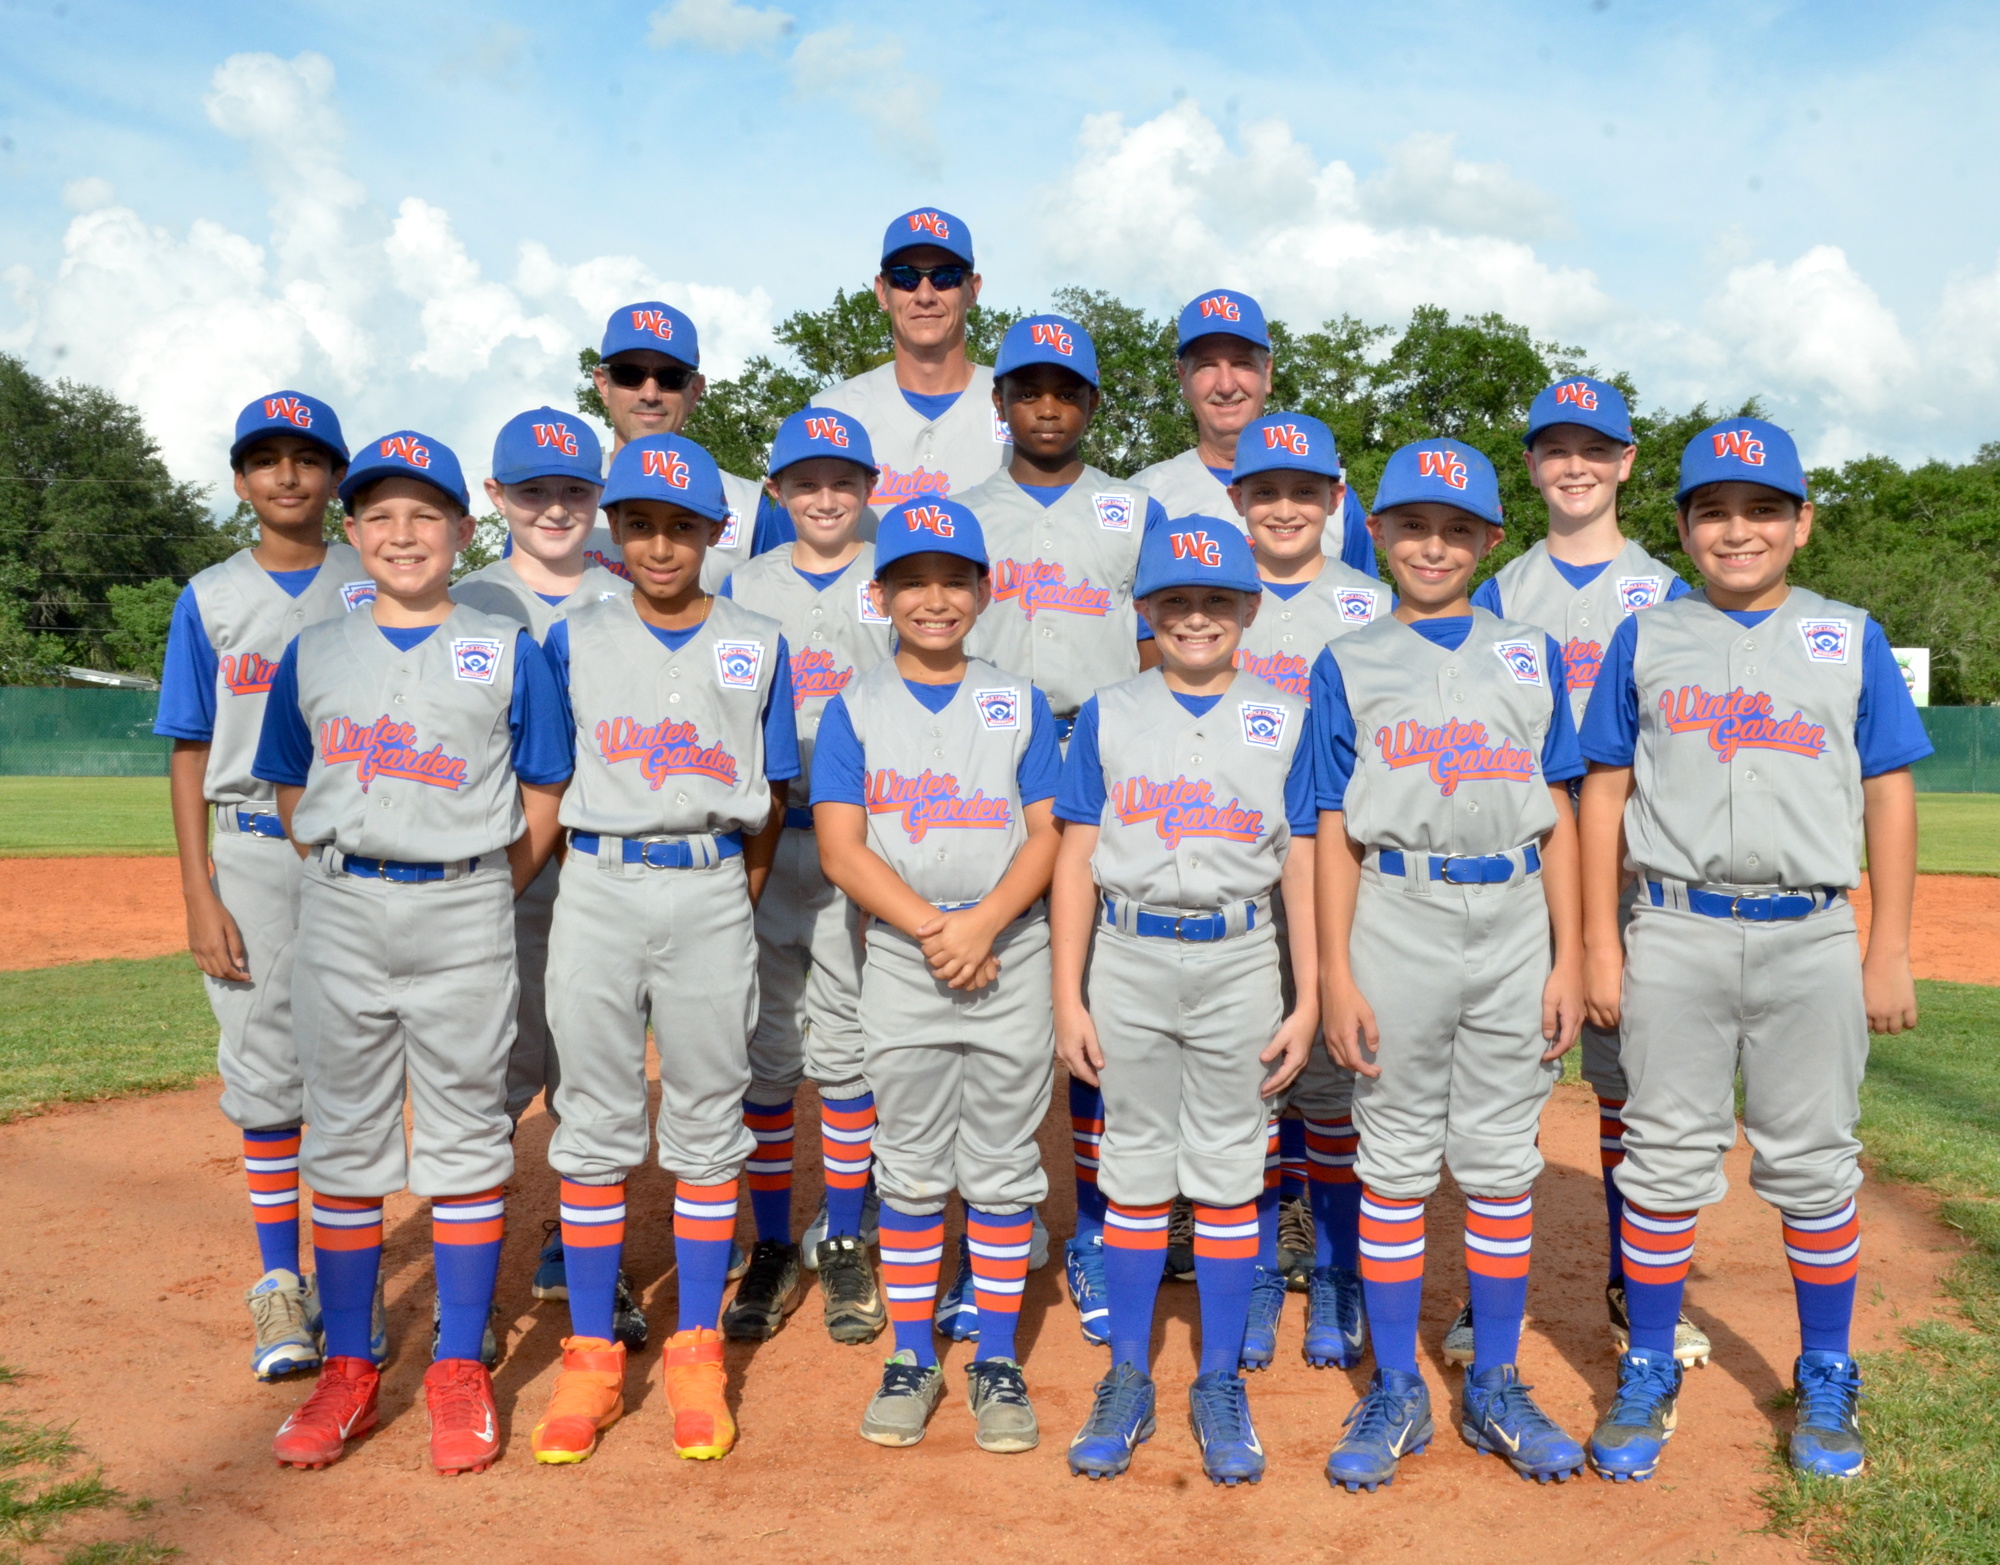 Winter Garden's 11-year-old team went 3-2 during the district tournament.